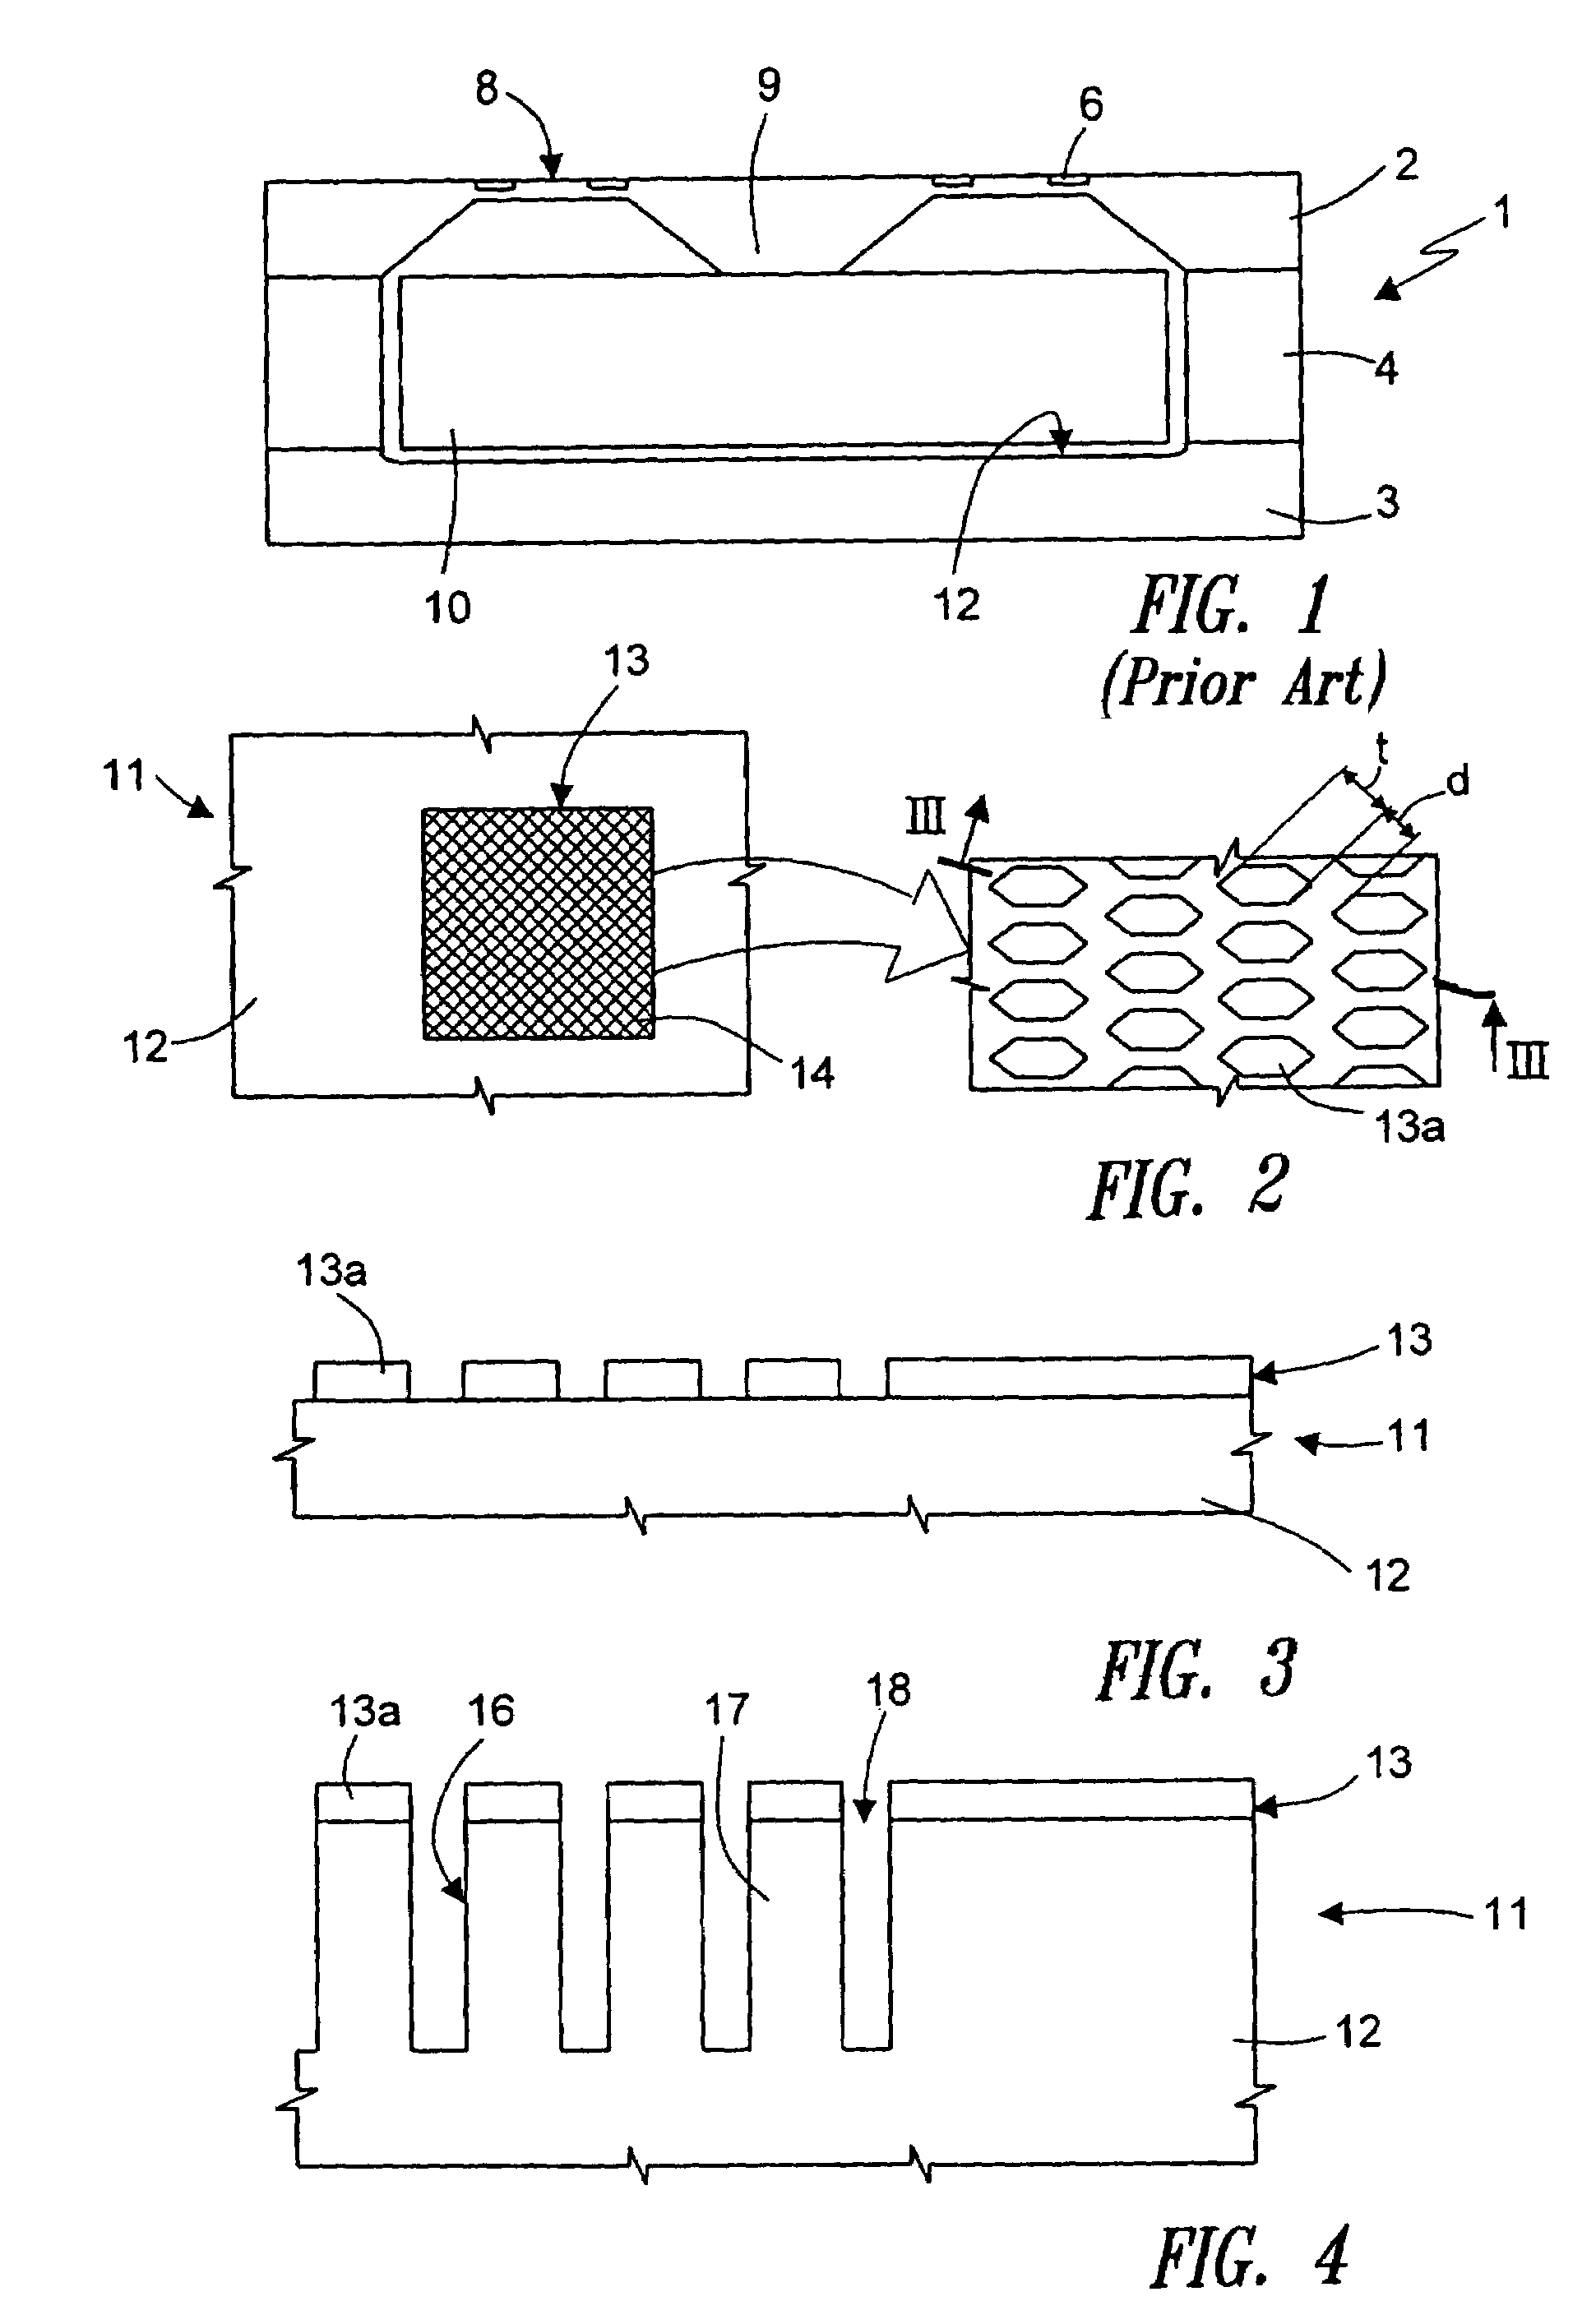 Process for manufacturing a triaxial piezoresistive accelerometer and relative pressure-monitoring device